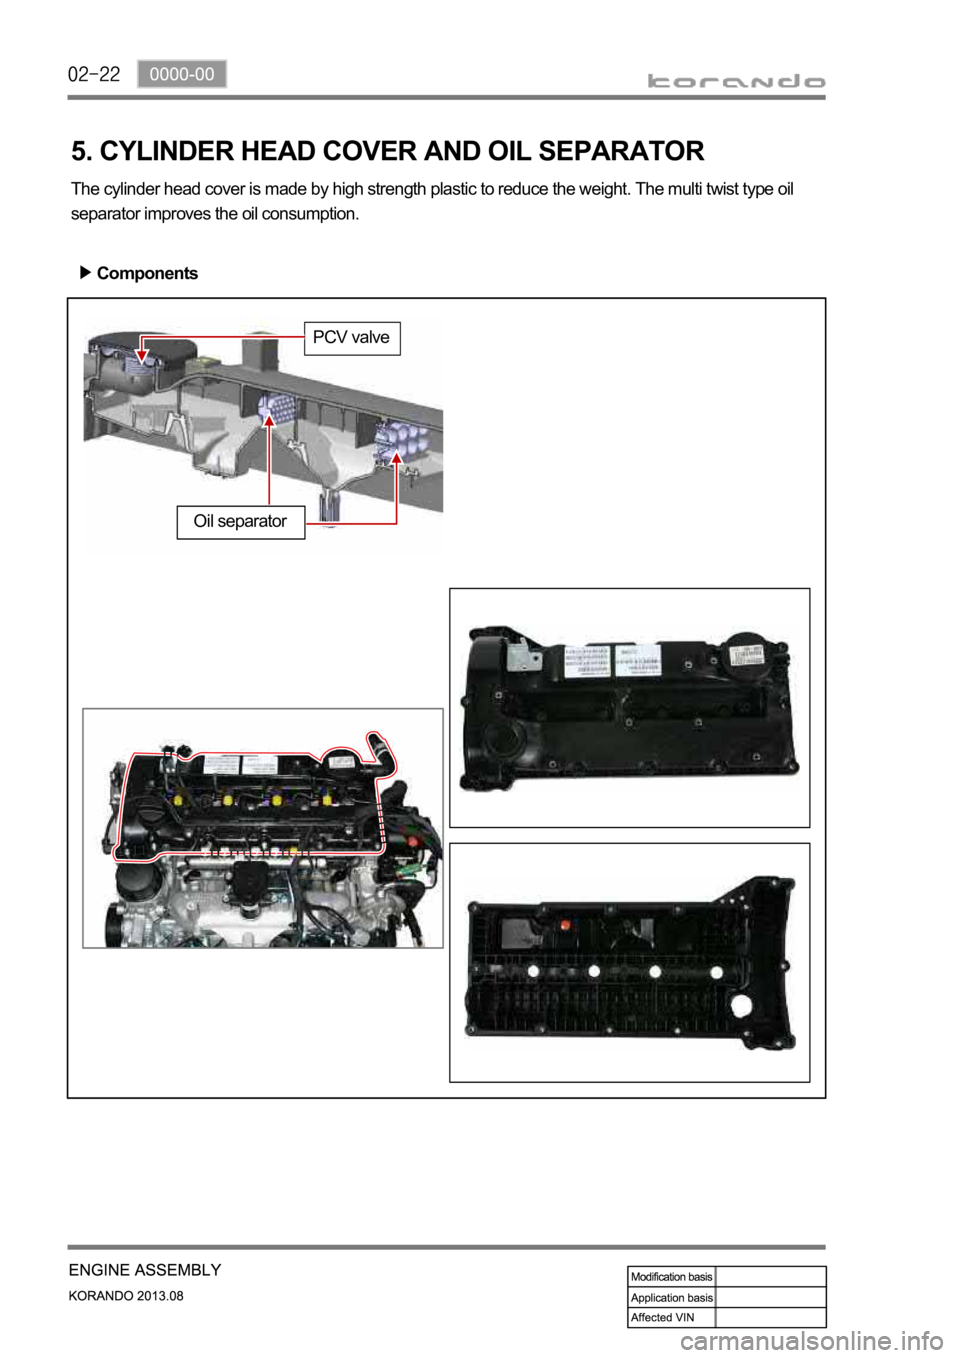 SSANGYONG KORANDO 2013  Service Manual 5. CYLINDER HEAD COVER AND OIL SEPARATOR
The cylinder head cover is made by high strength plastic to reduce the weight. The multi twist type oil 
separator improves the oil consumption.
Components
Oil